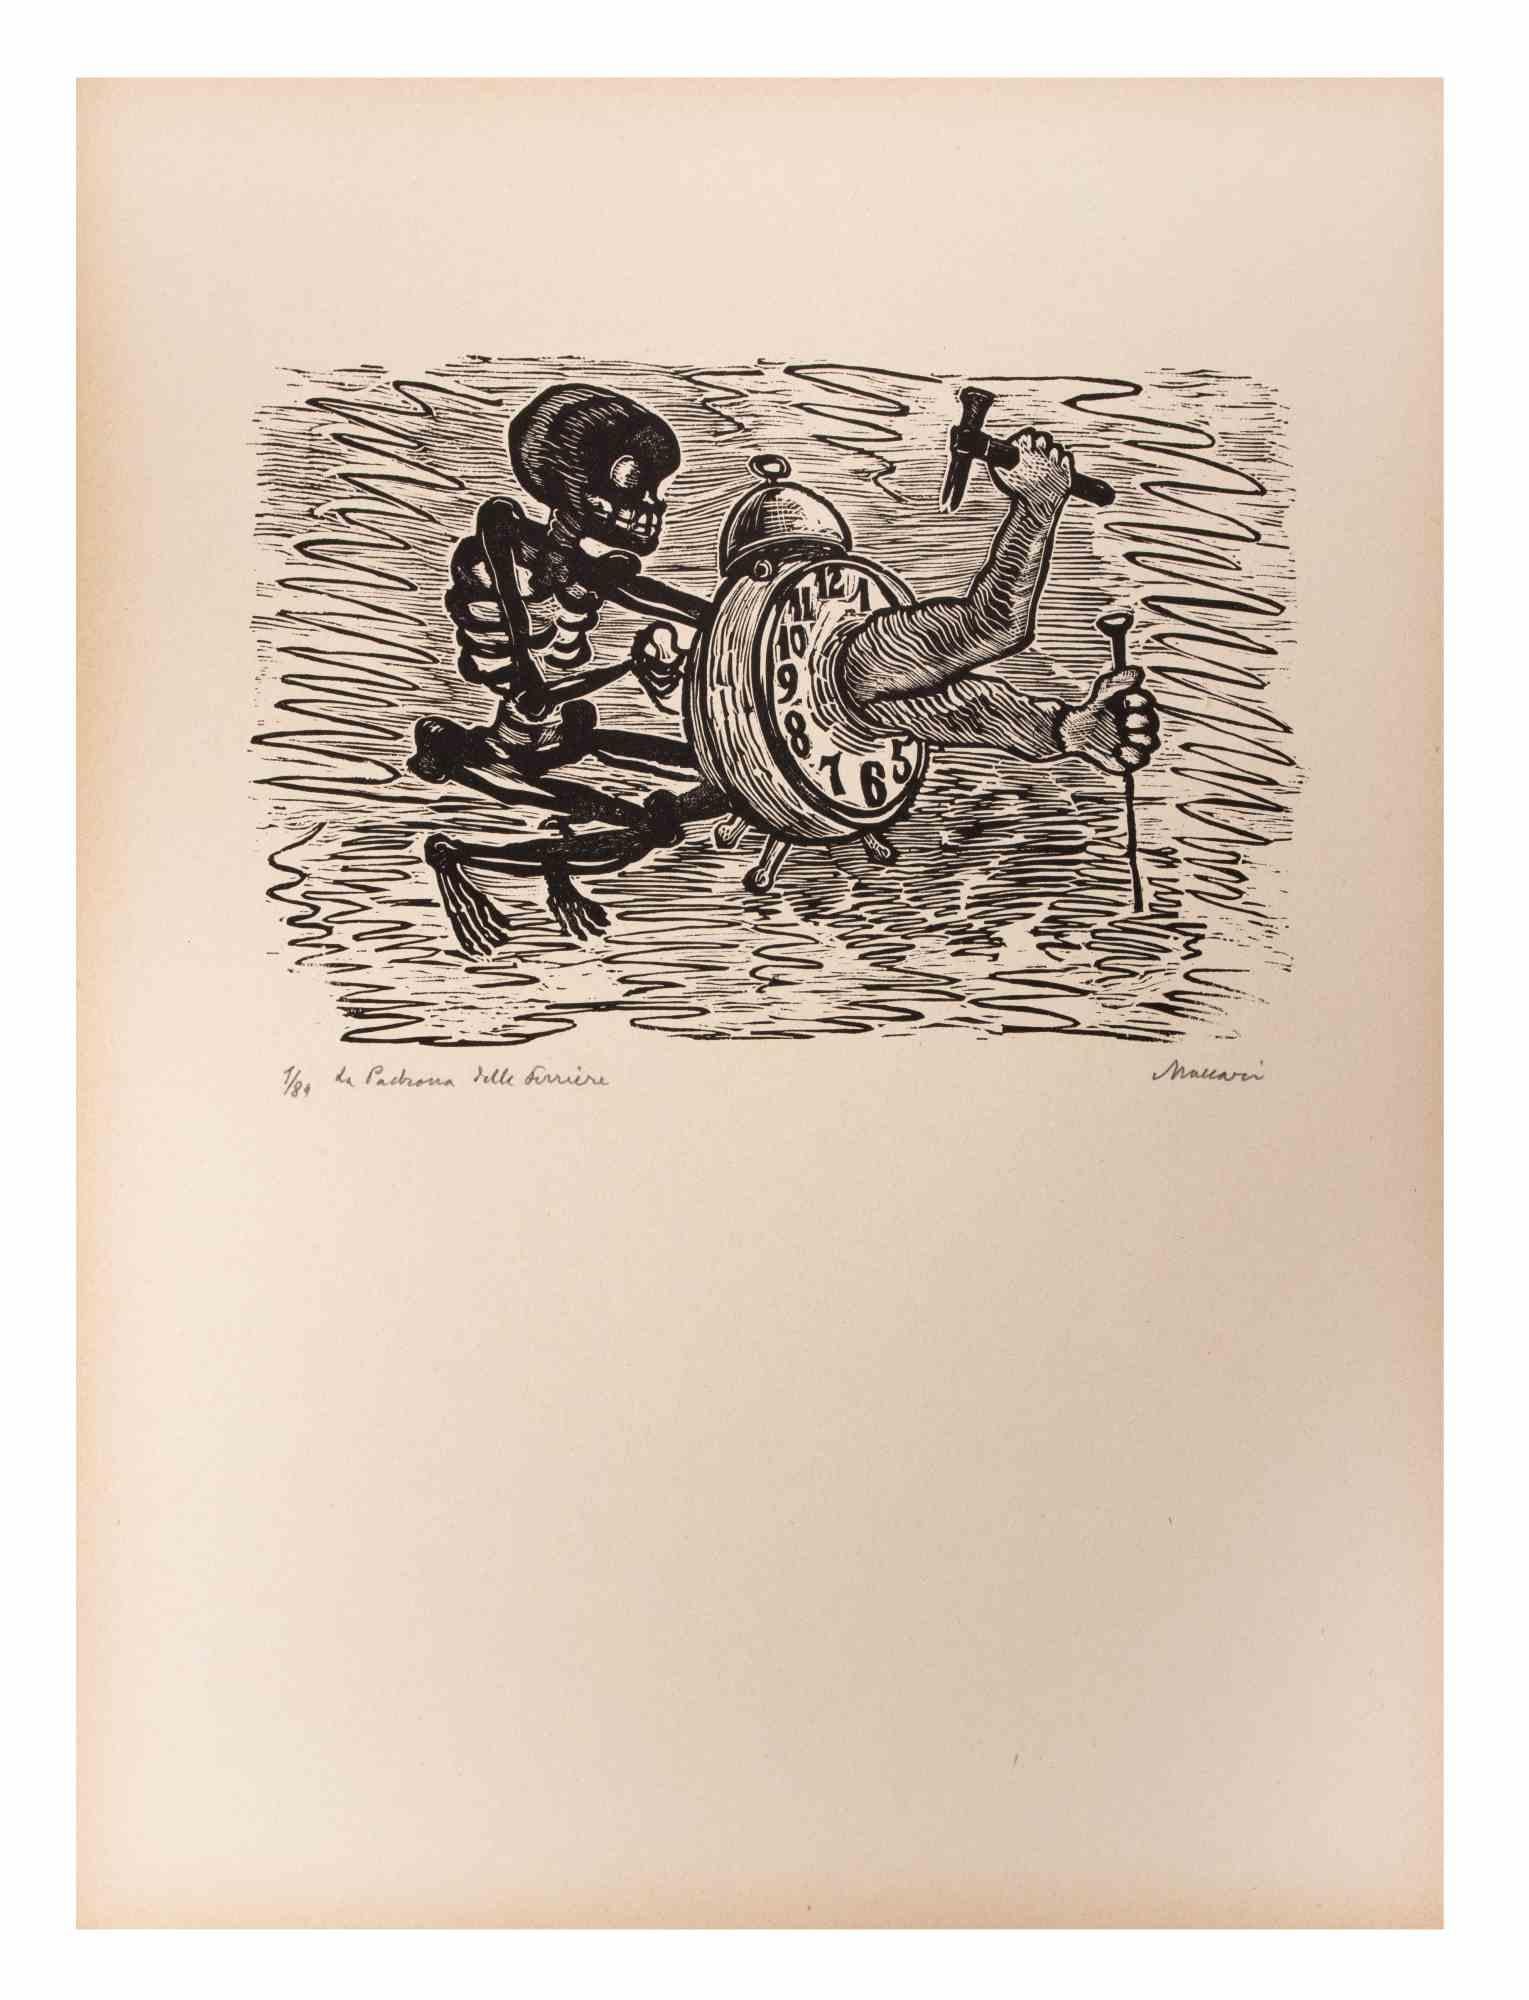 The Mistress is an Artwork realized by Mino Maccari  (1924-1989) in the Mid-20th Century.

B./W. Woodcut on paper. Hand-signed on the lower, numbered 1/89 specimens and titled on the left margin.

Good conditions.

Mino Maccari (Siena, 1924-Rome,